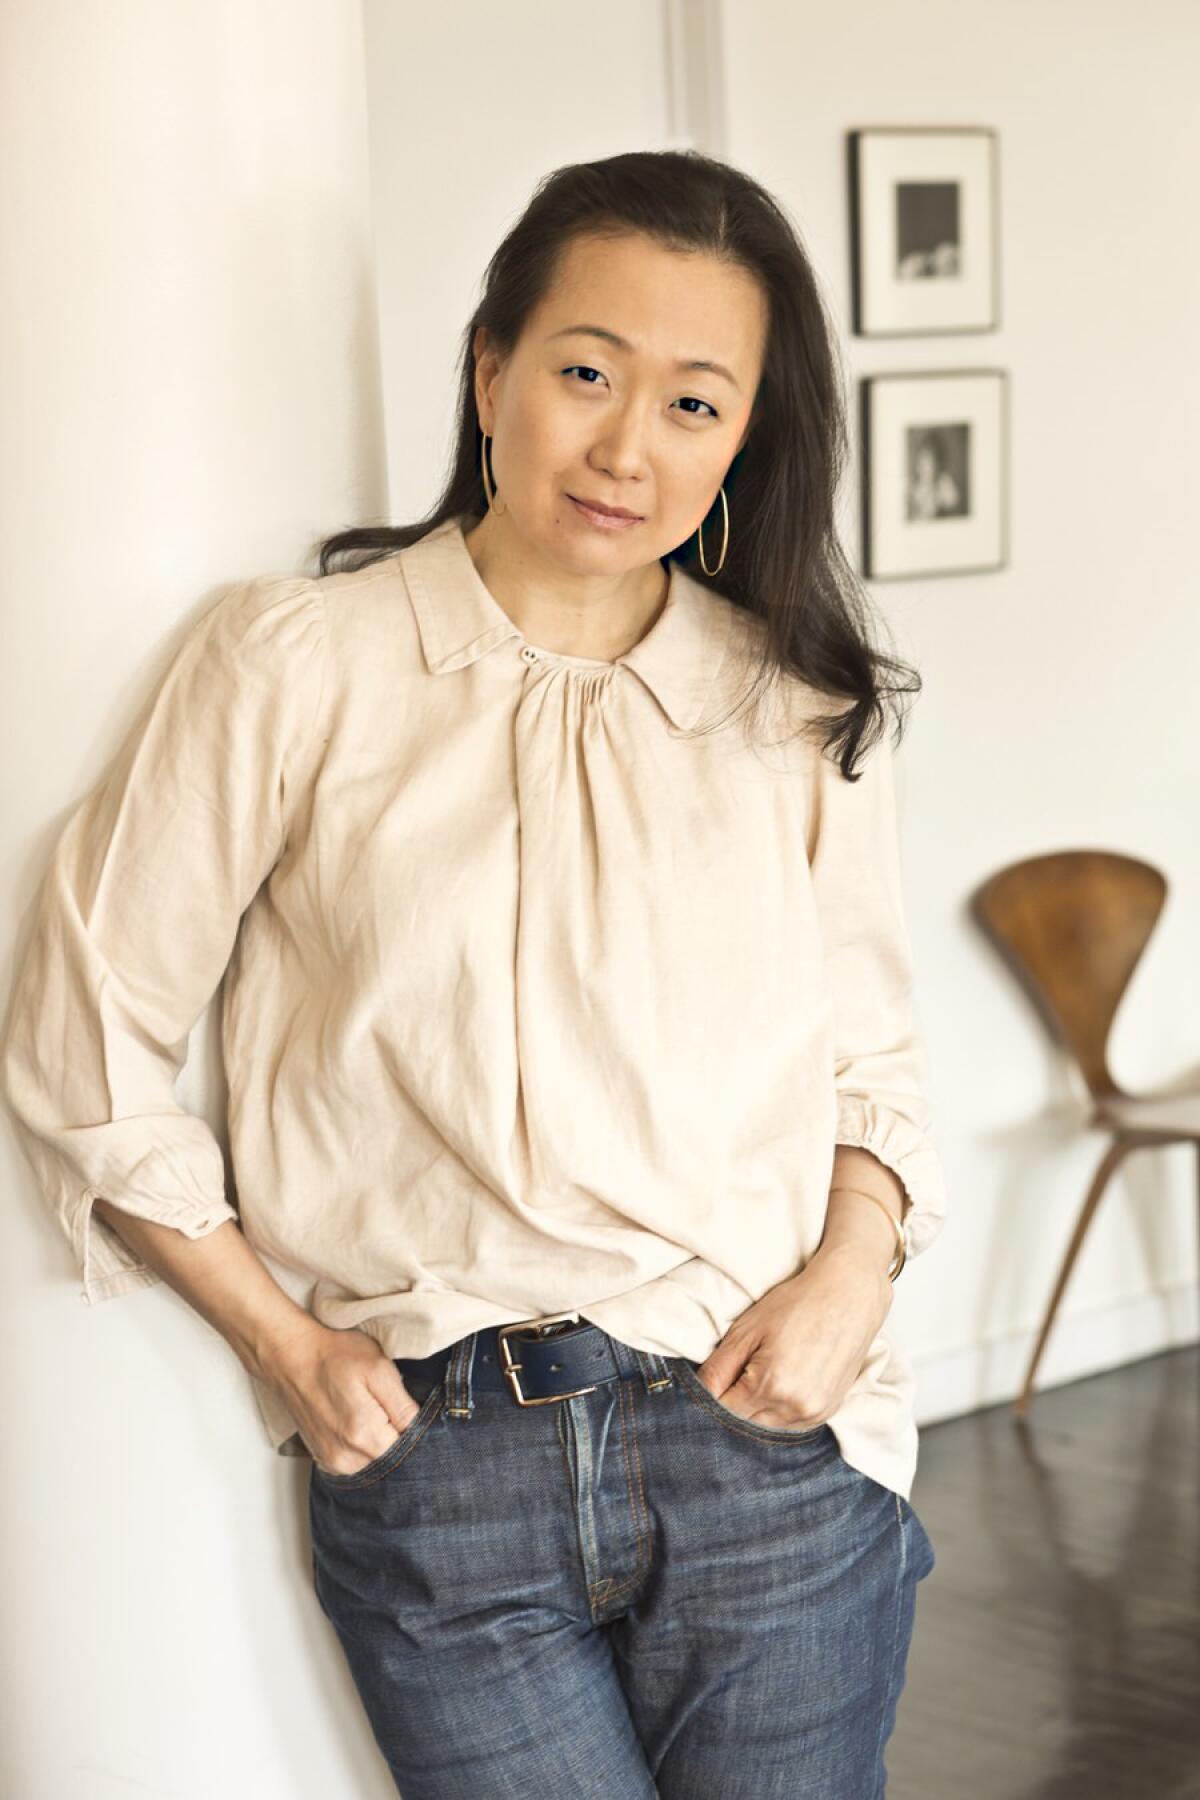 A woman leaning against a wall with her hands in her pants pockets